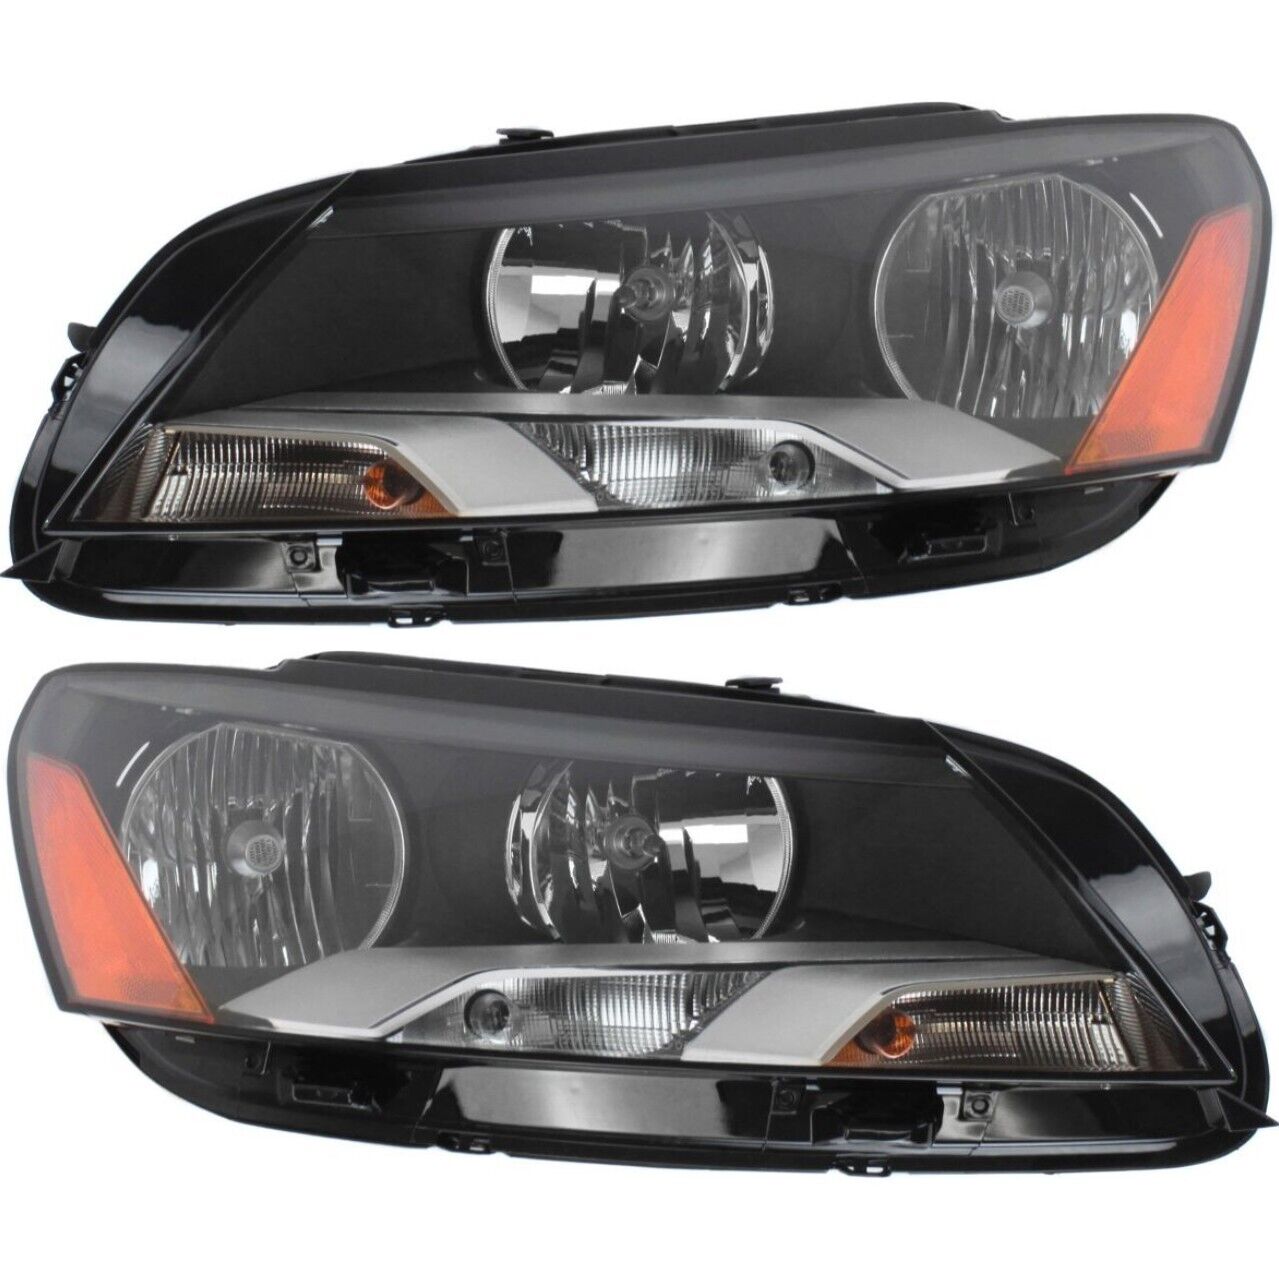 Headlight Set For 2012-2015 Volkswagen Passat Left and Right With Bulb 2Pc